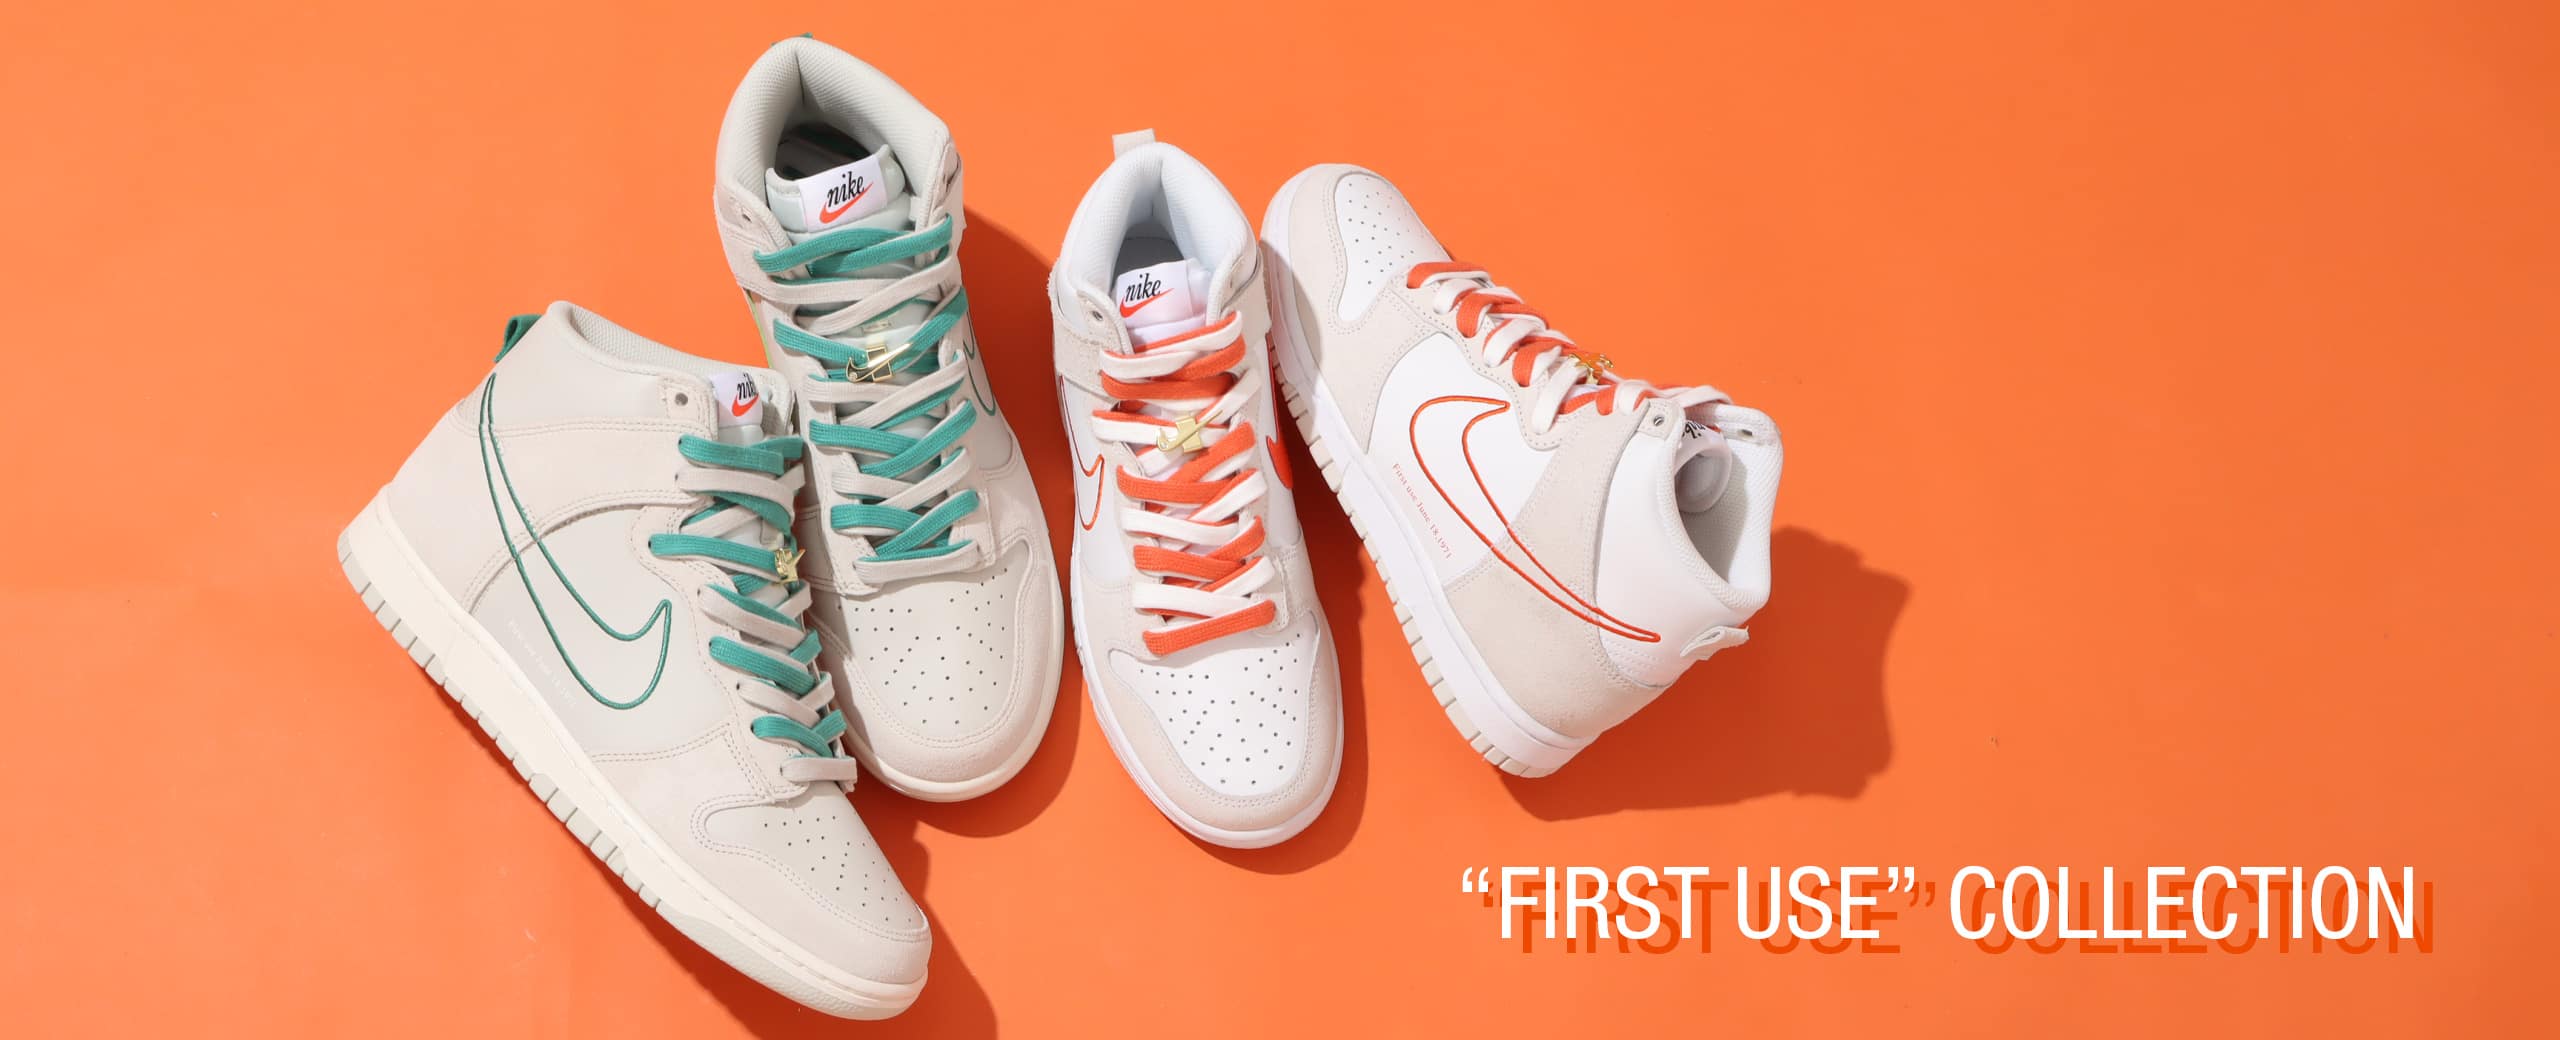 "NIKE “FIRST USE” COLLECTION"